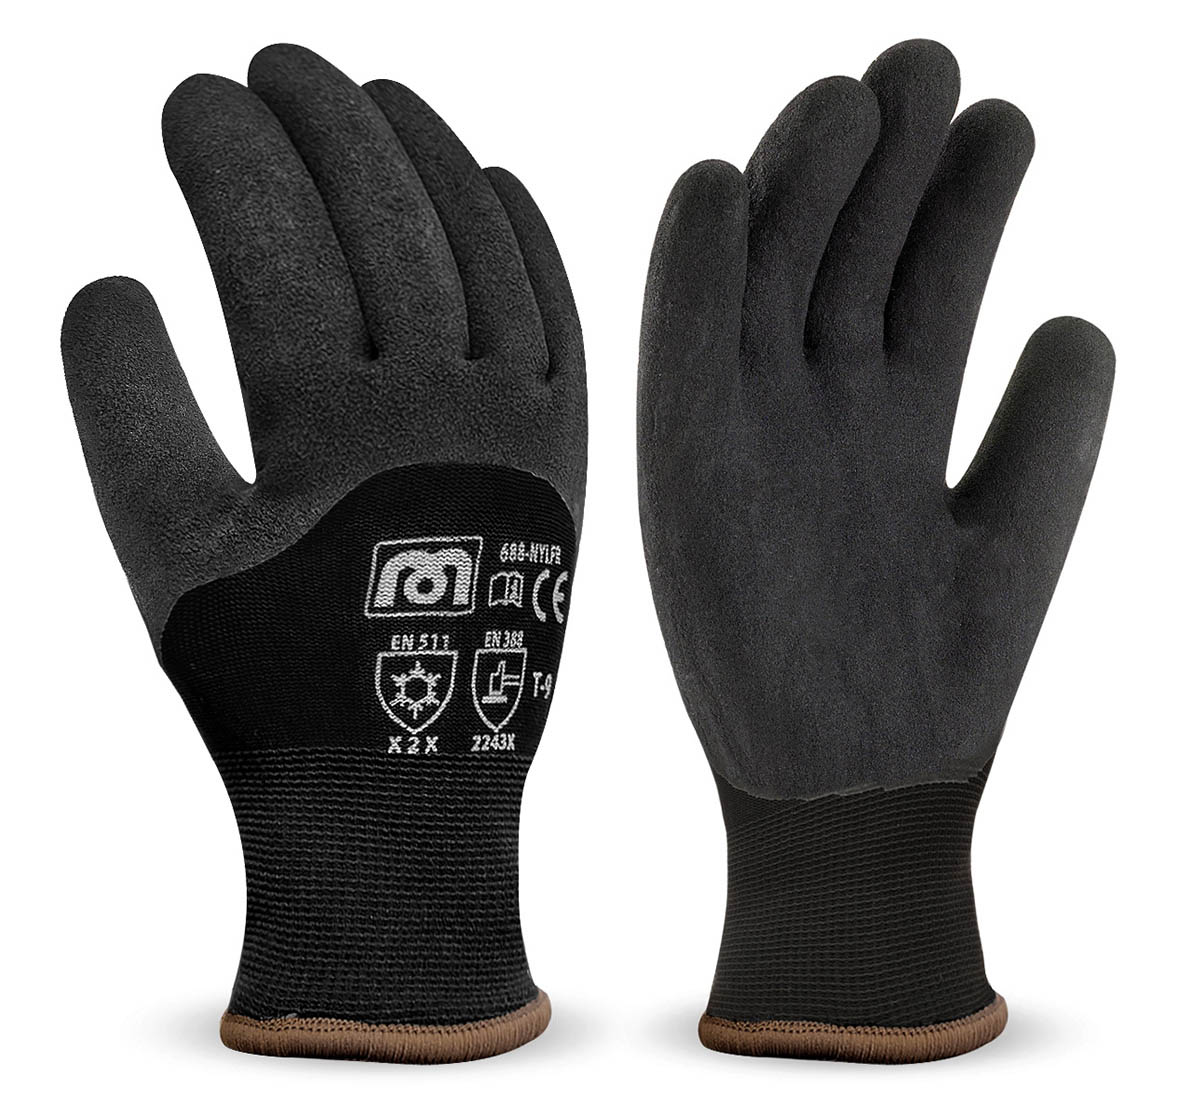 688-NYLFR Work Gloves Insulated Black nylon glove with covering of black coloured latex.